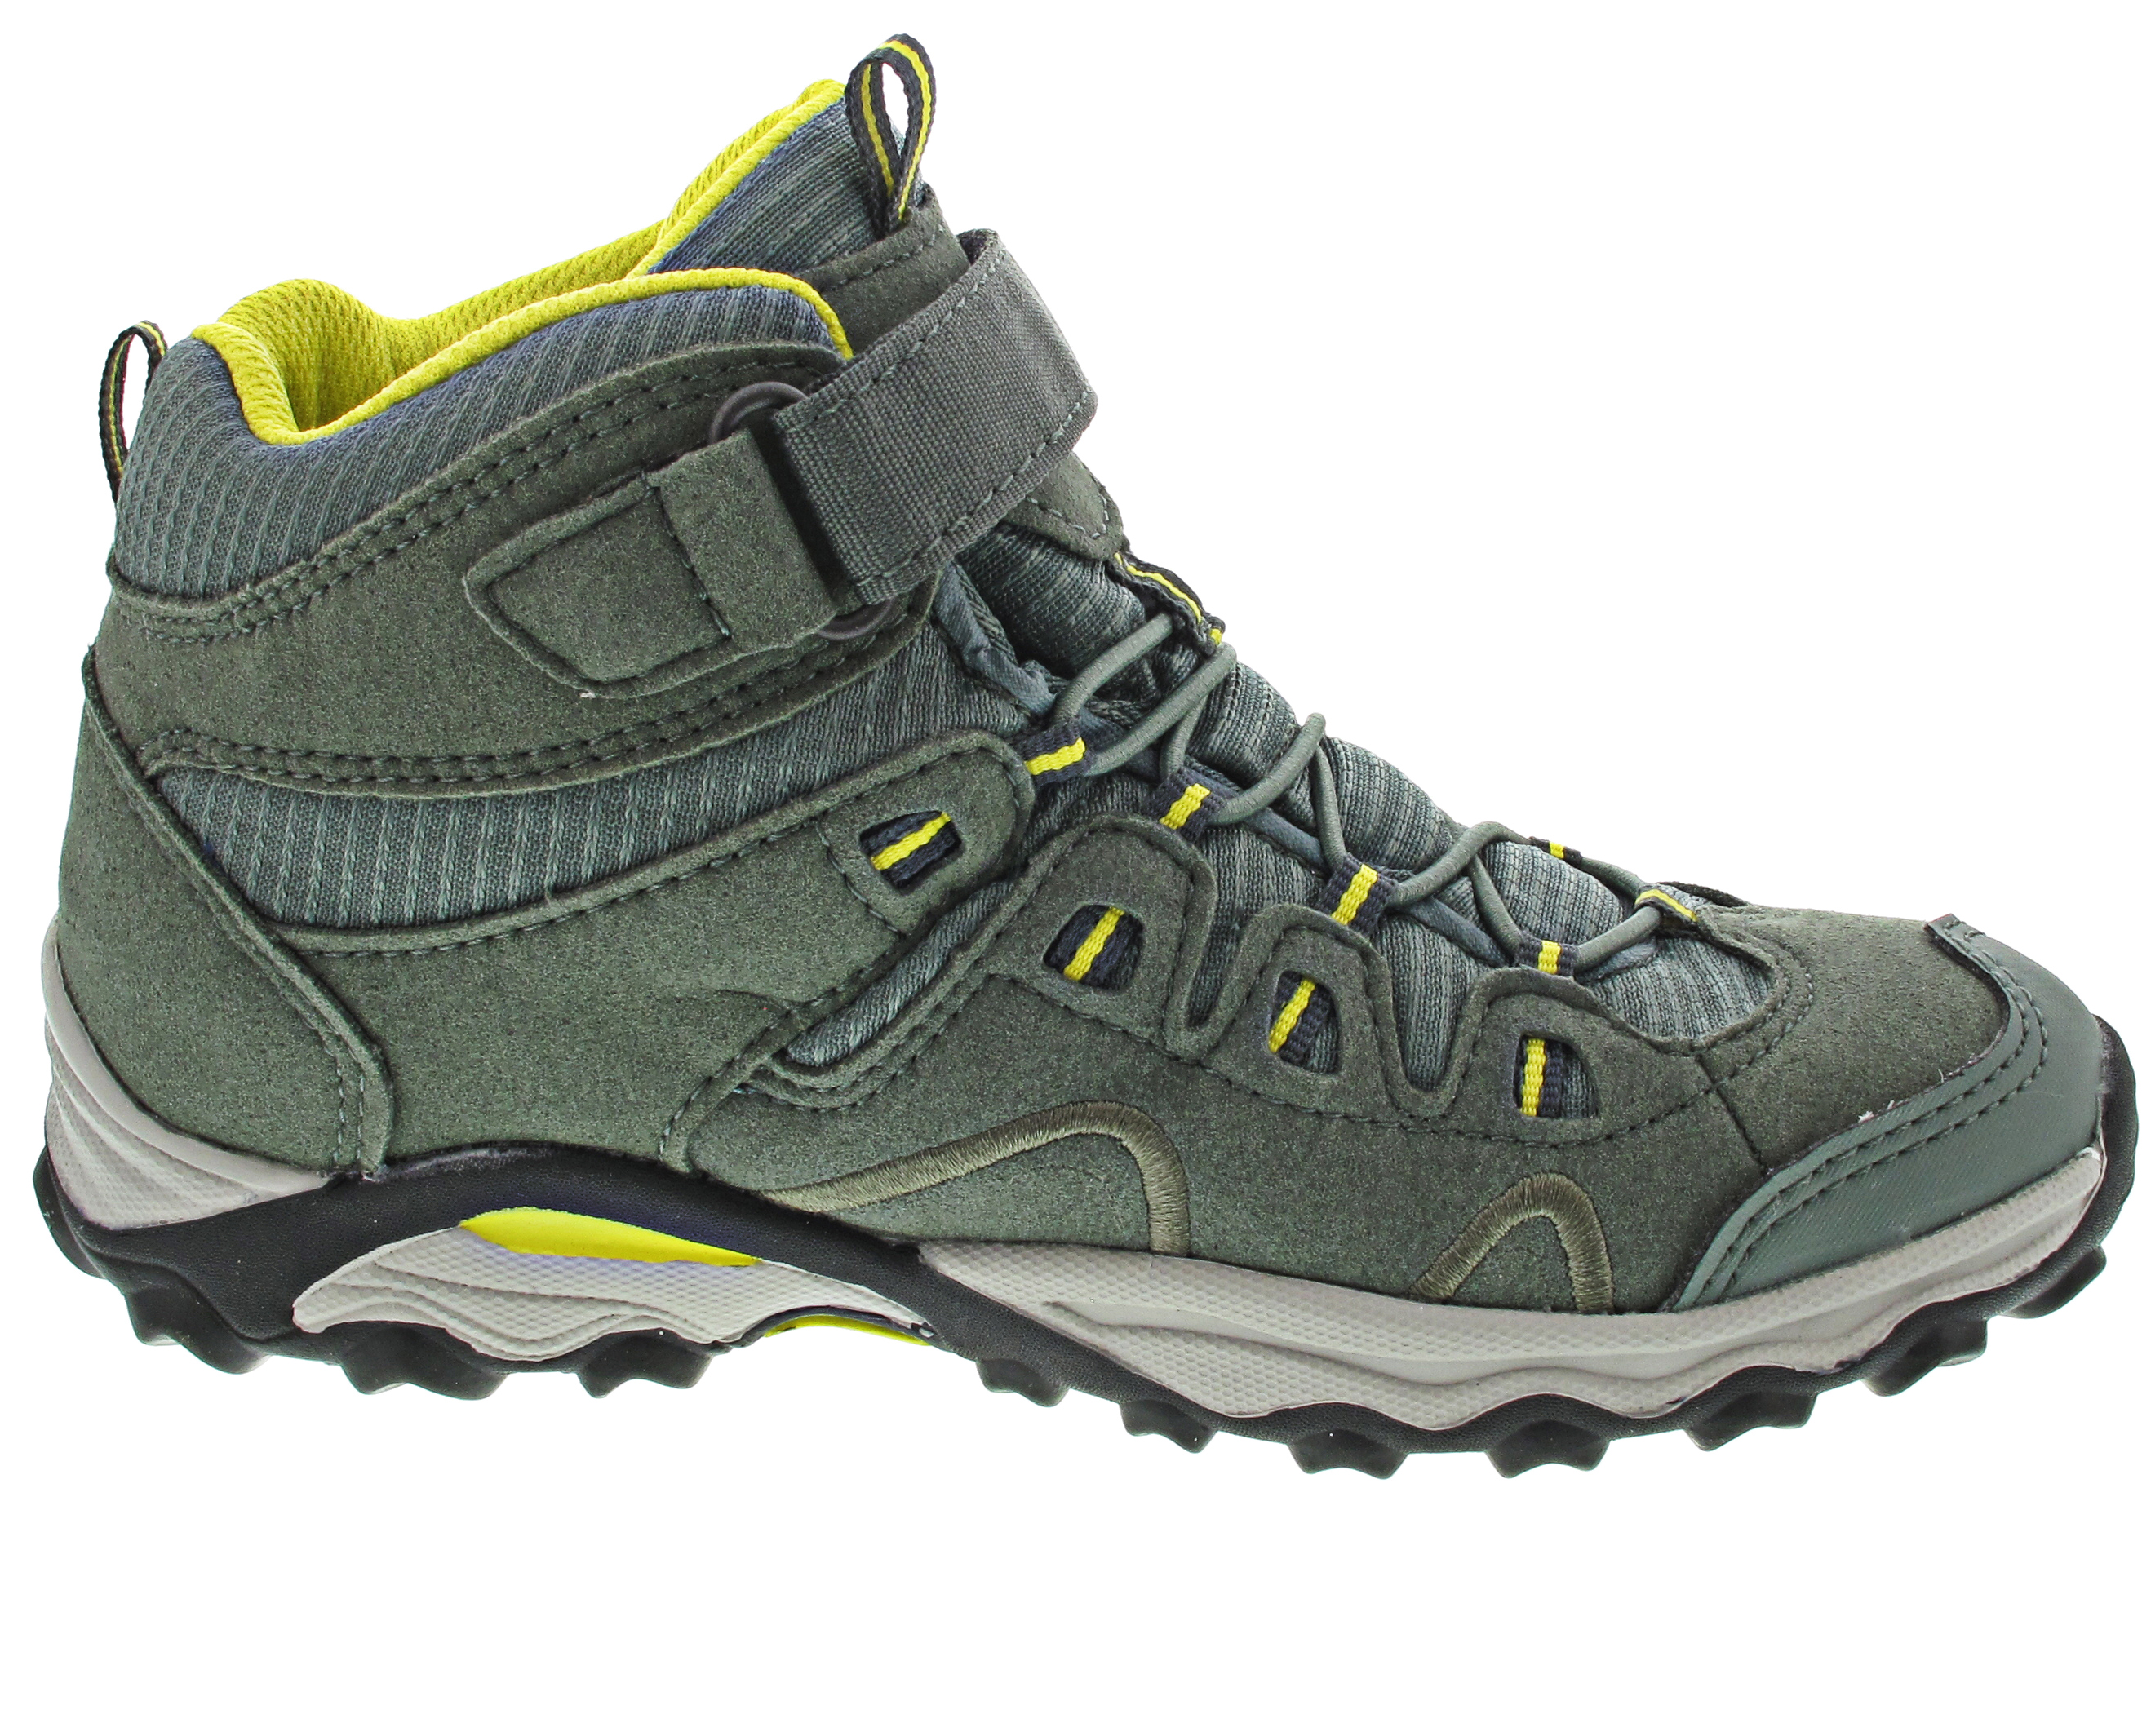 Meindl Lucca J. Mid GTX